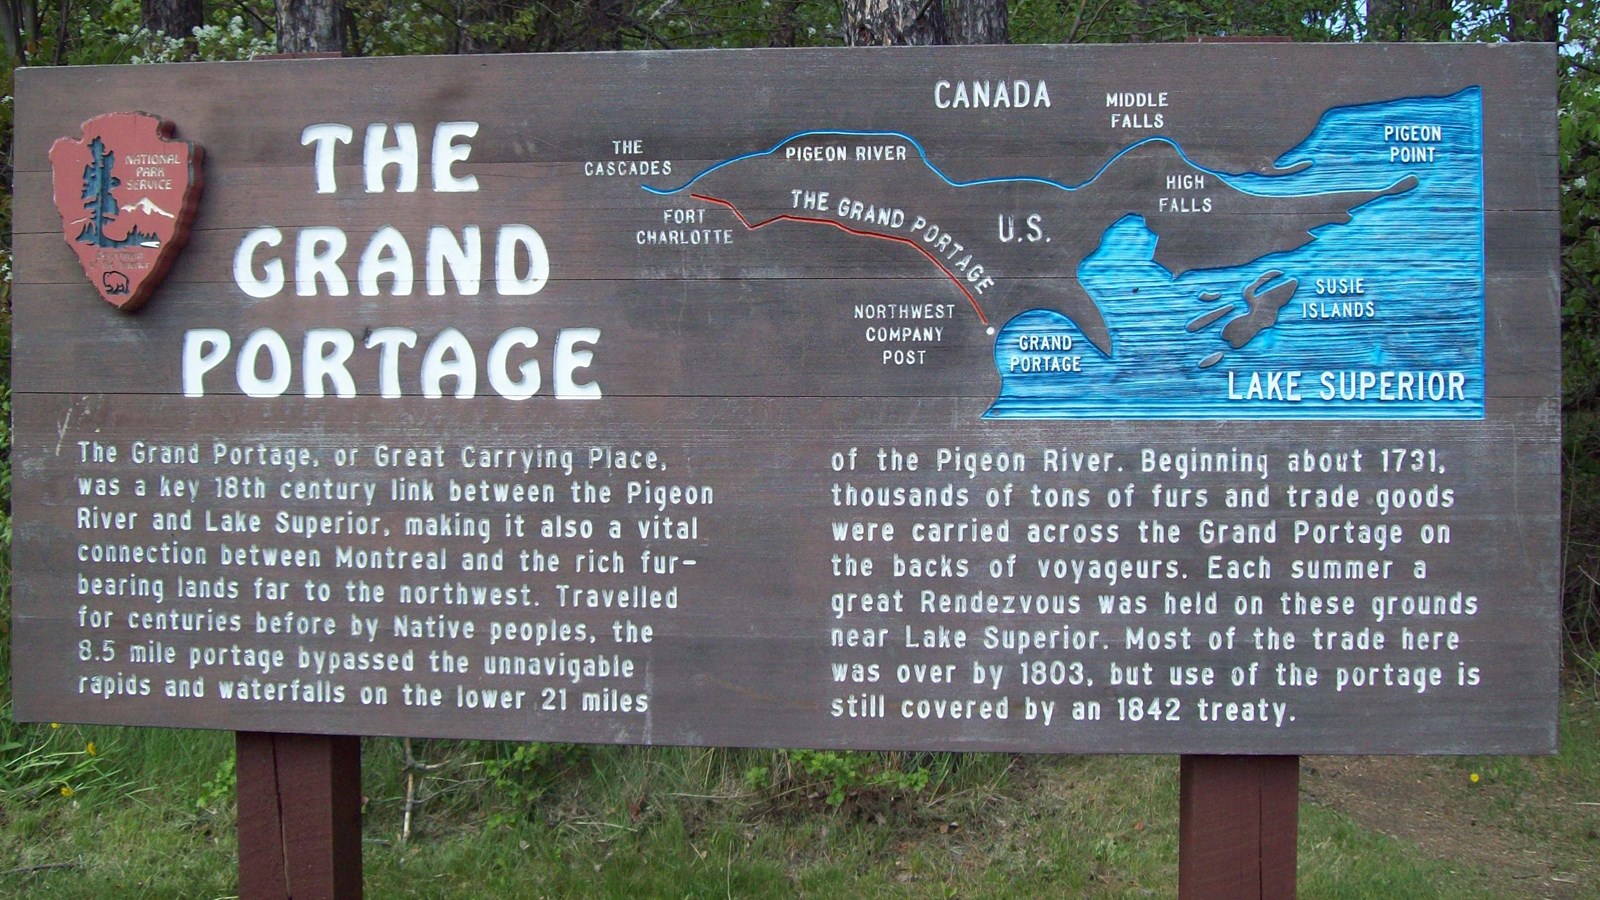 A wooden sign with a picture and text about the Grand Portage Trail